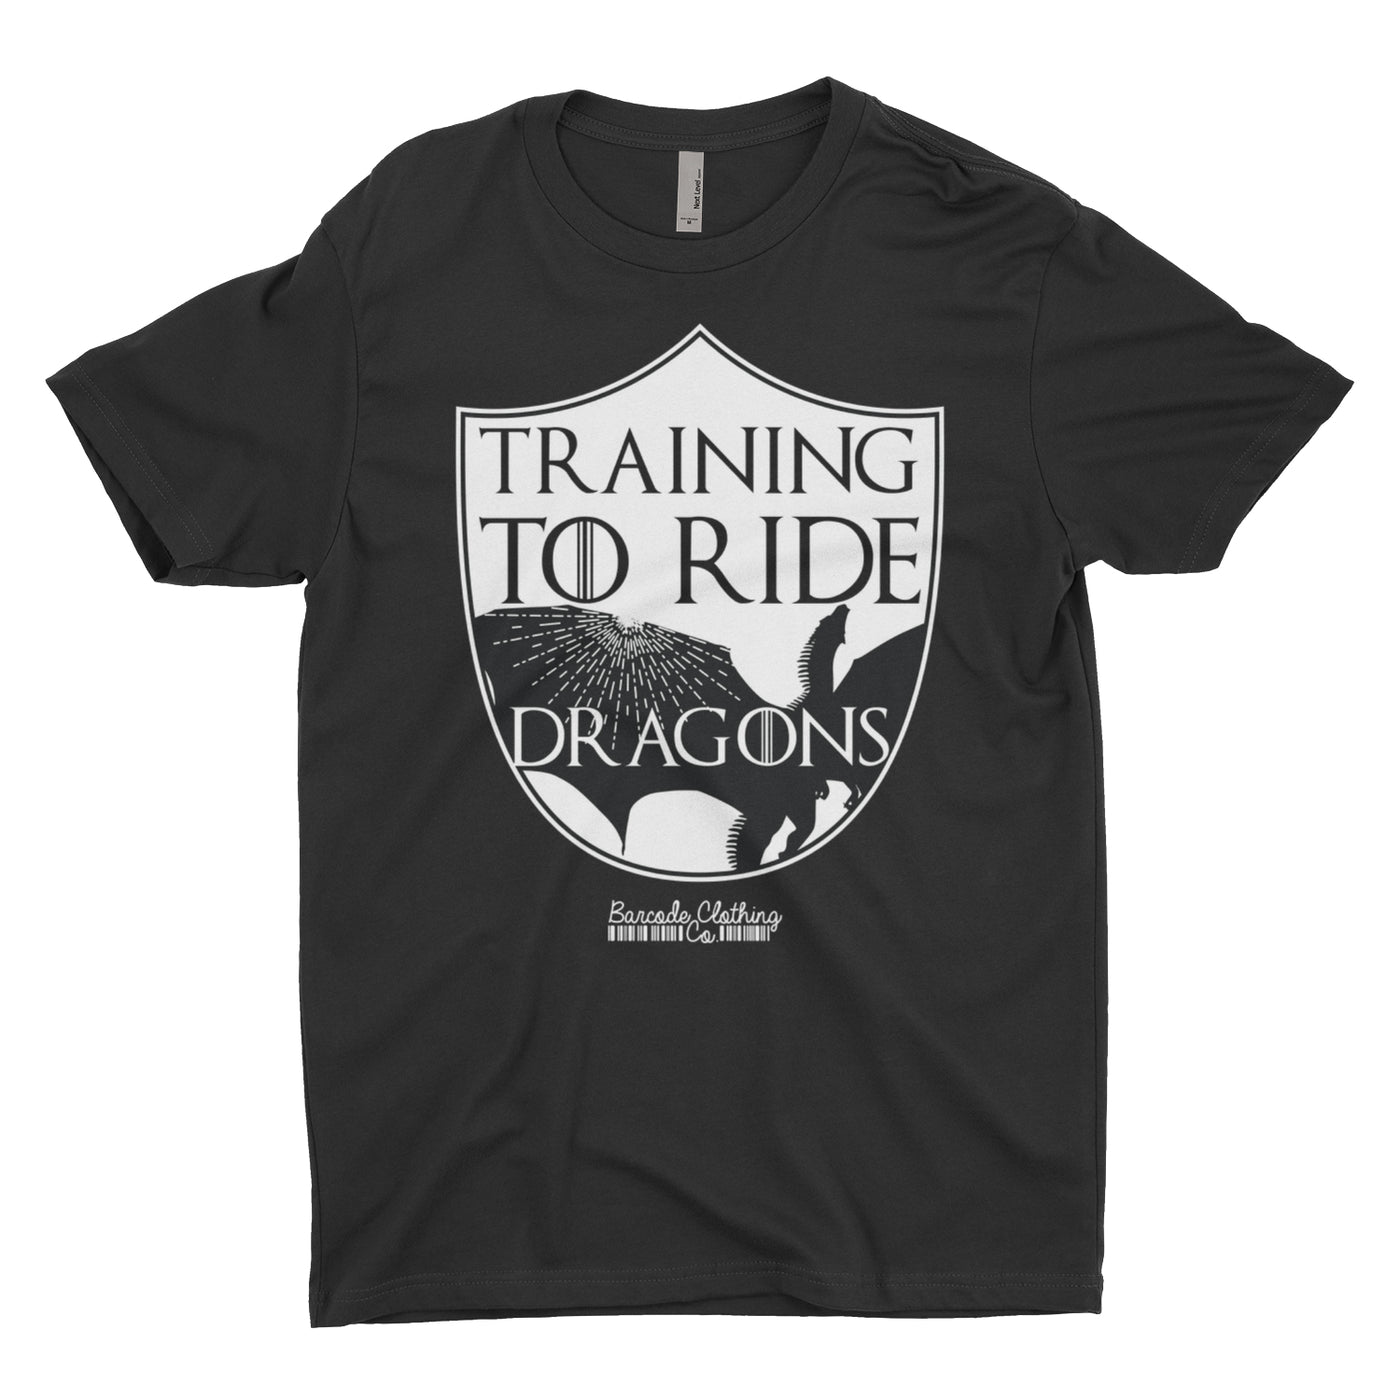 Training To Ride Dragons